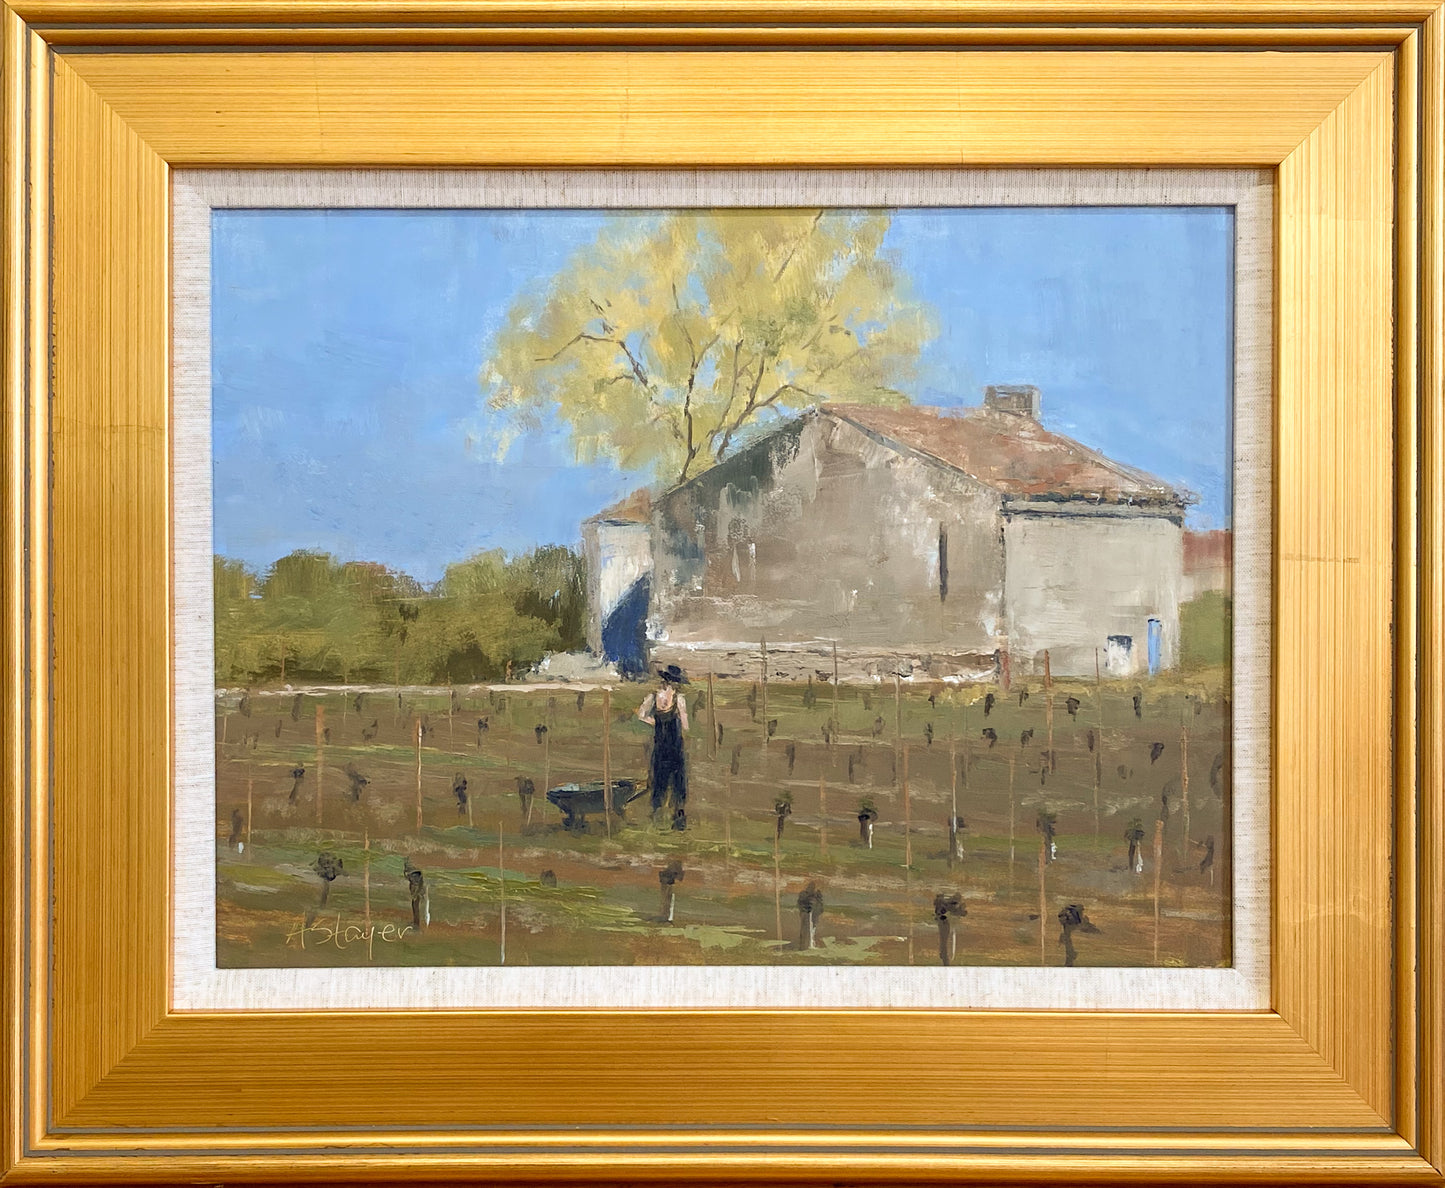 A French Travels Series - The Vine Keeper